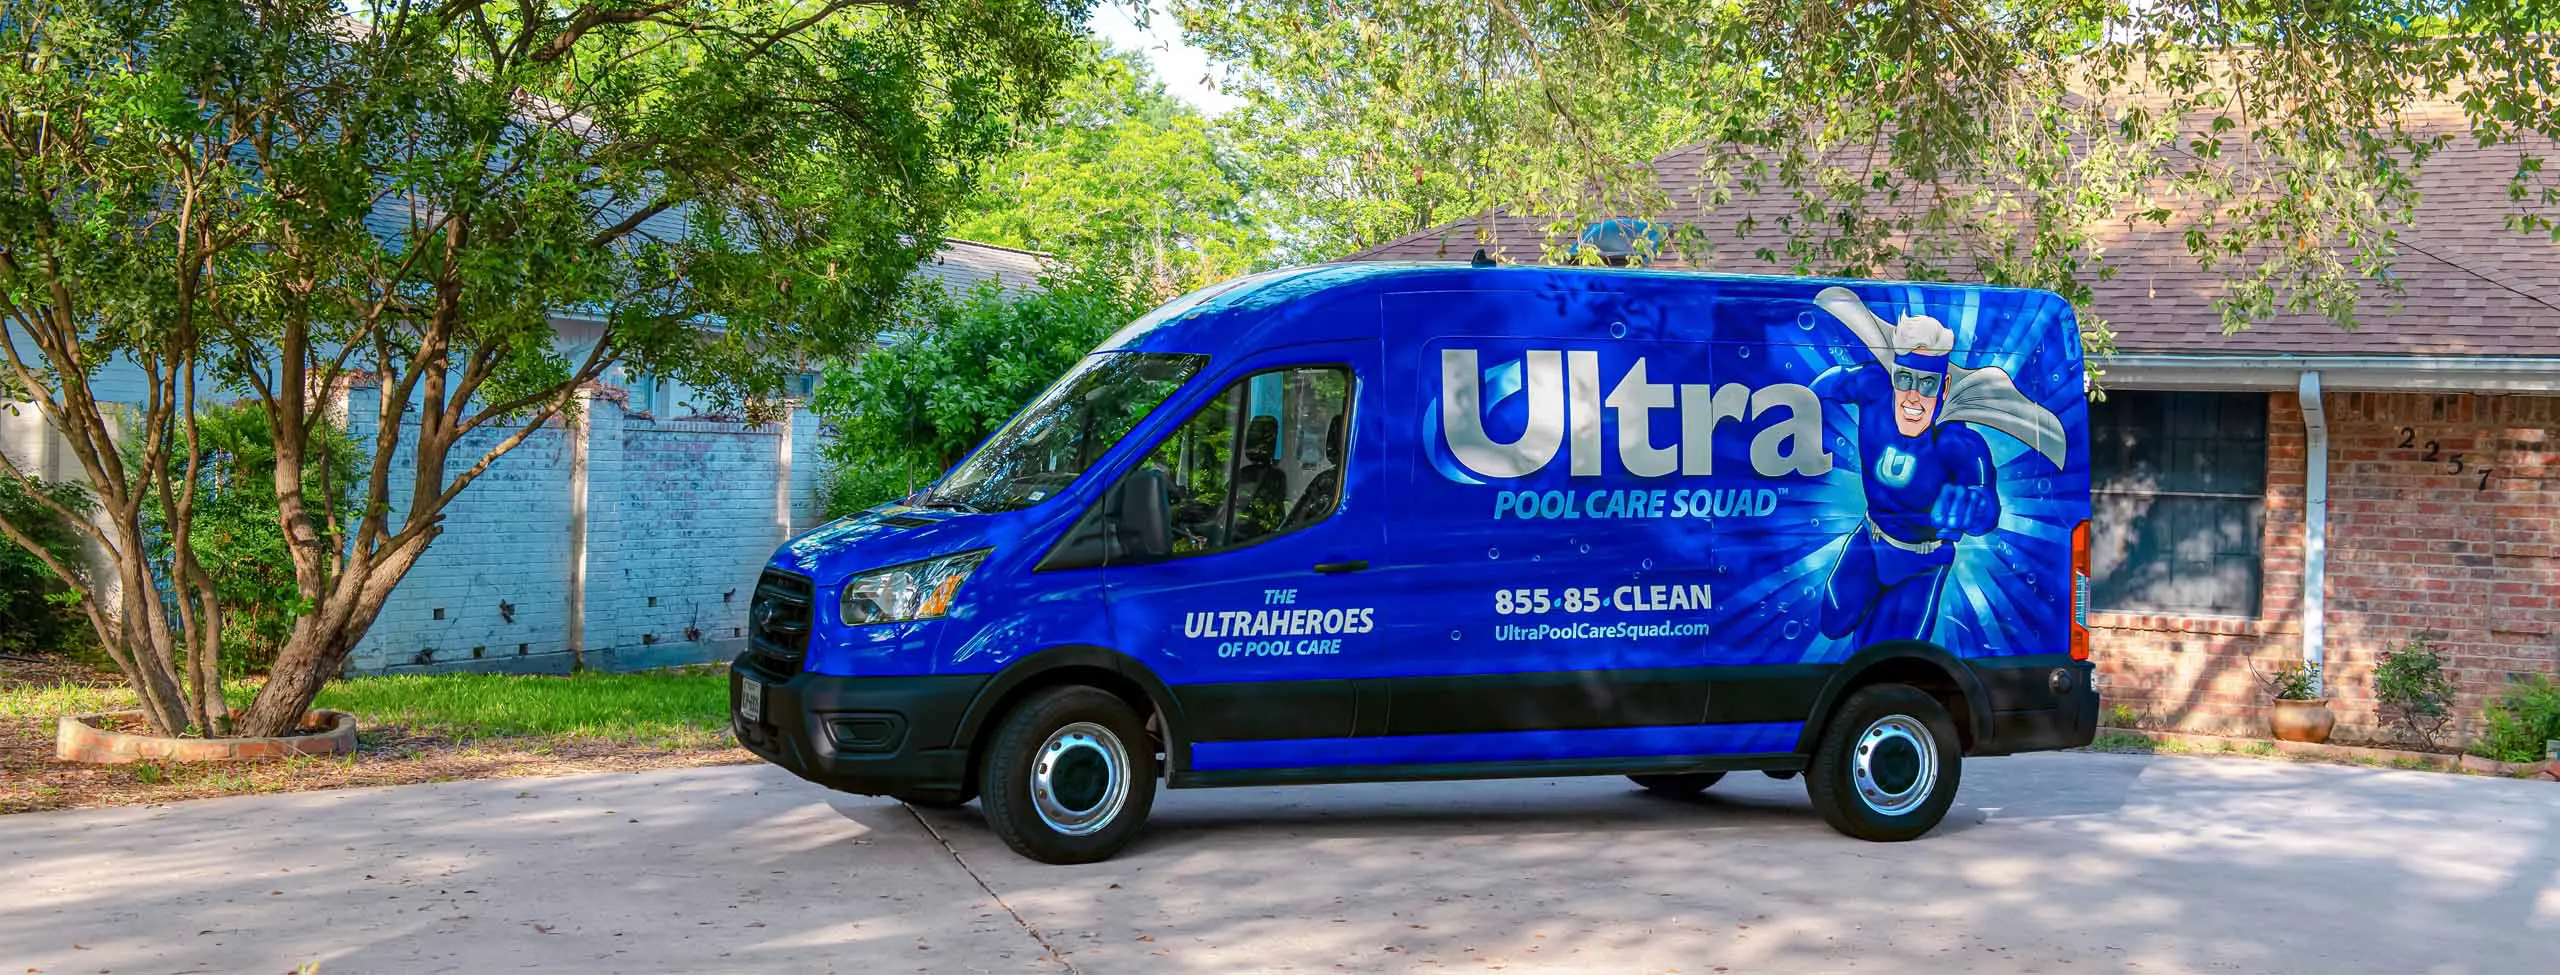 Ultra Pool Care Squad van parked during a pool cleaning service near you